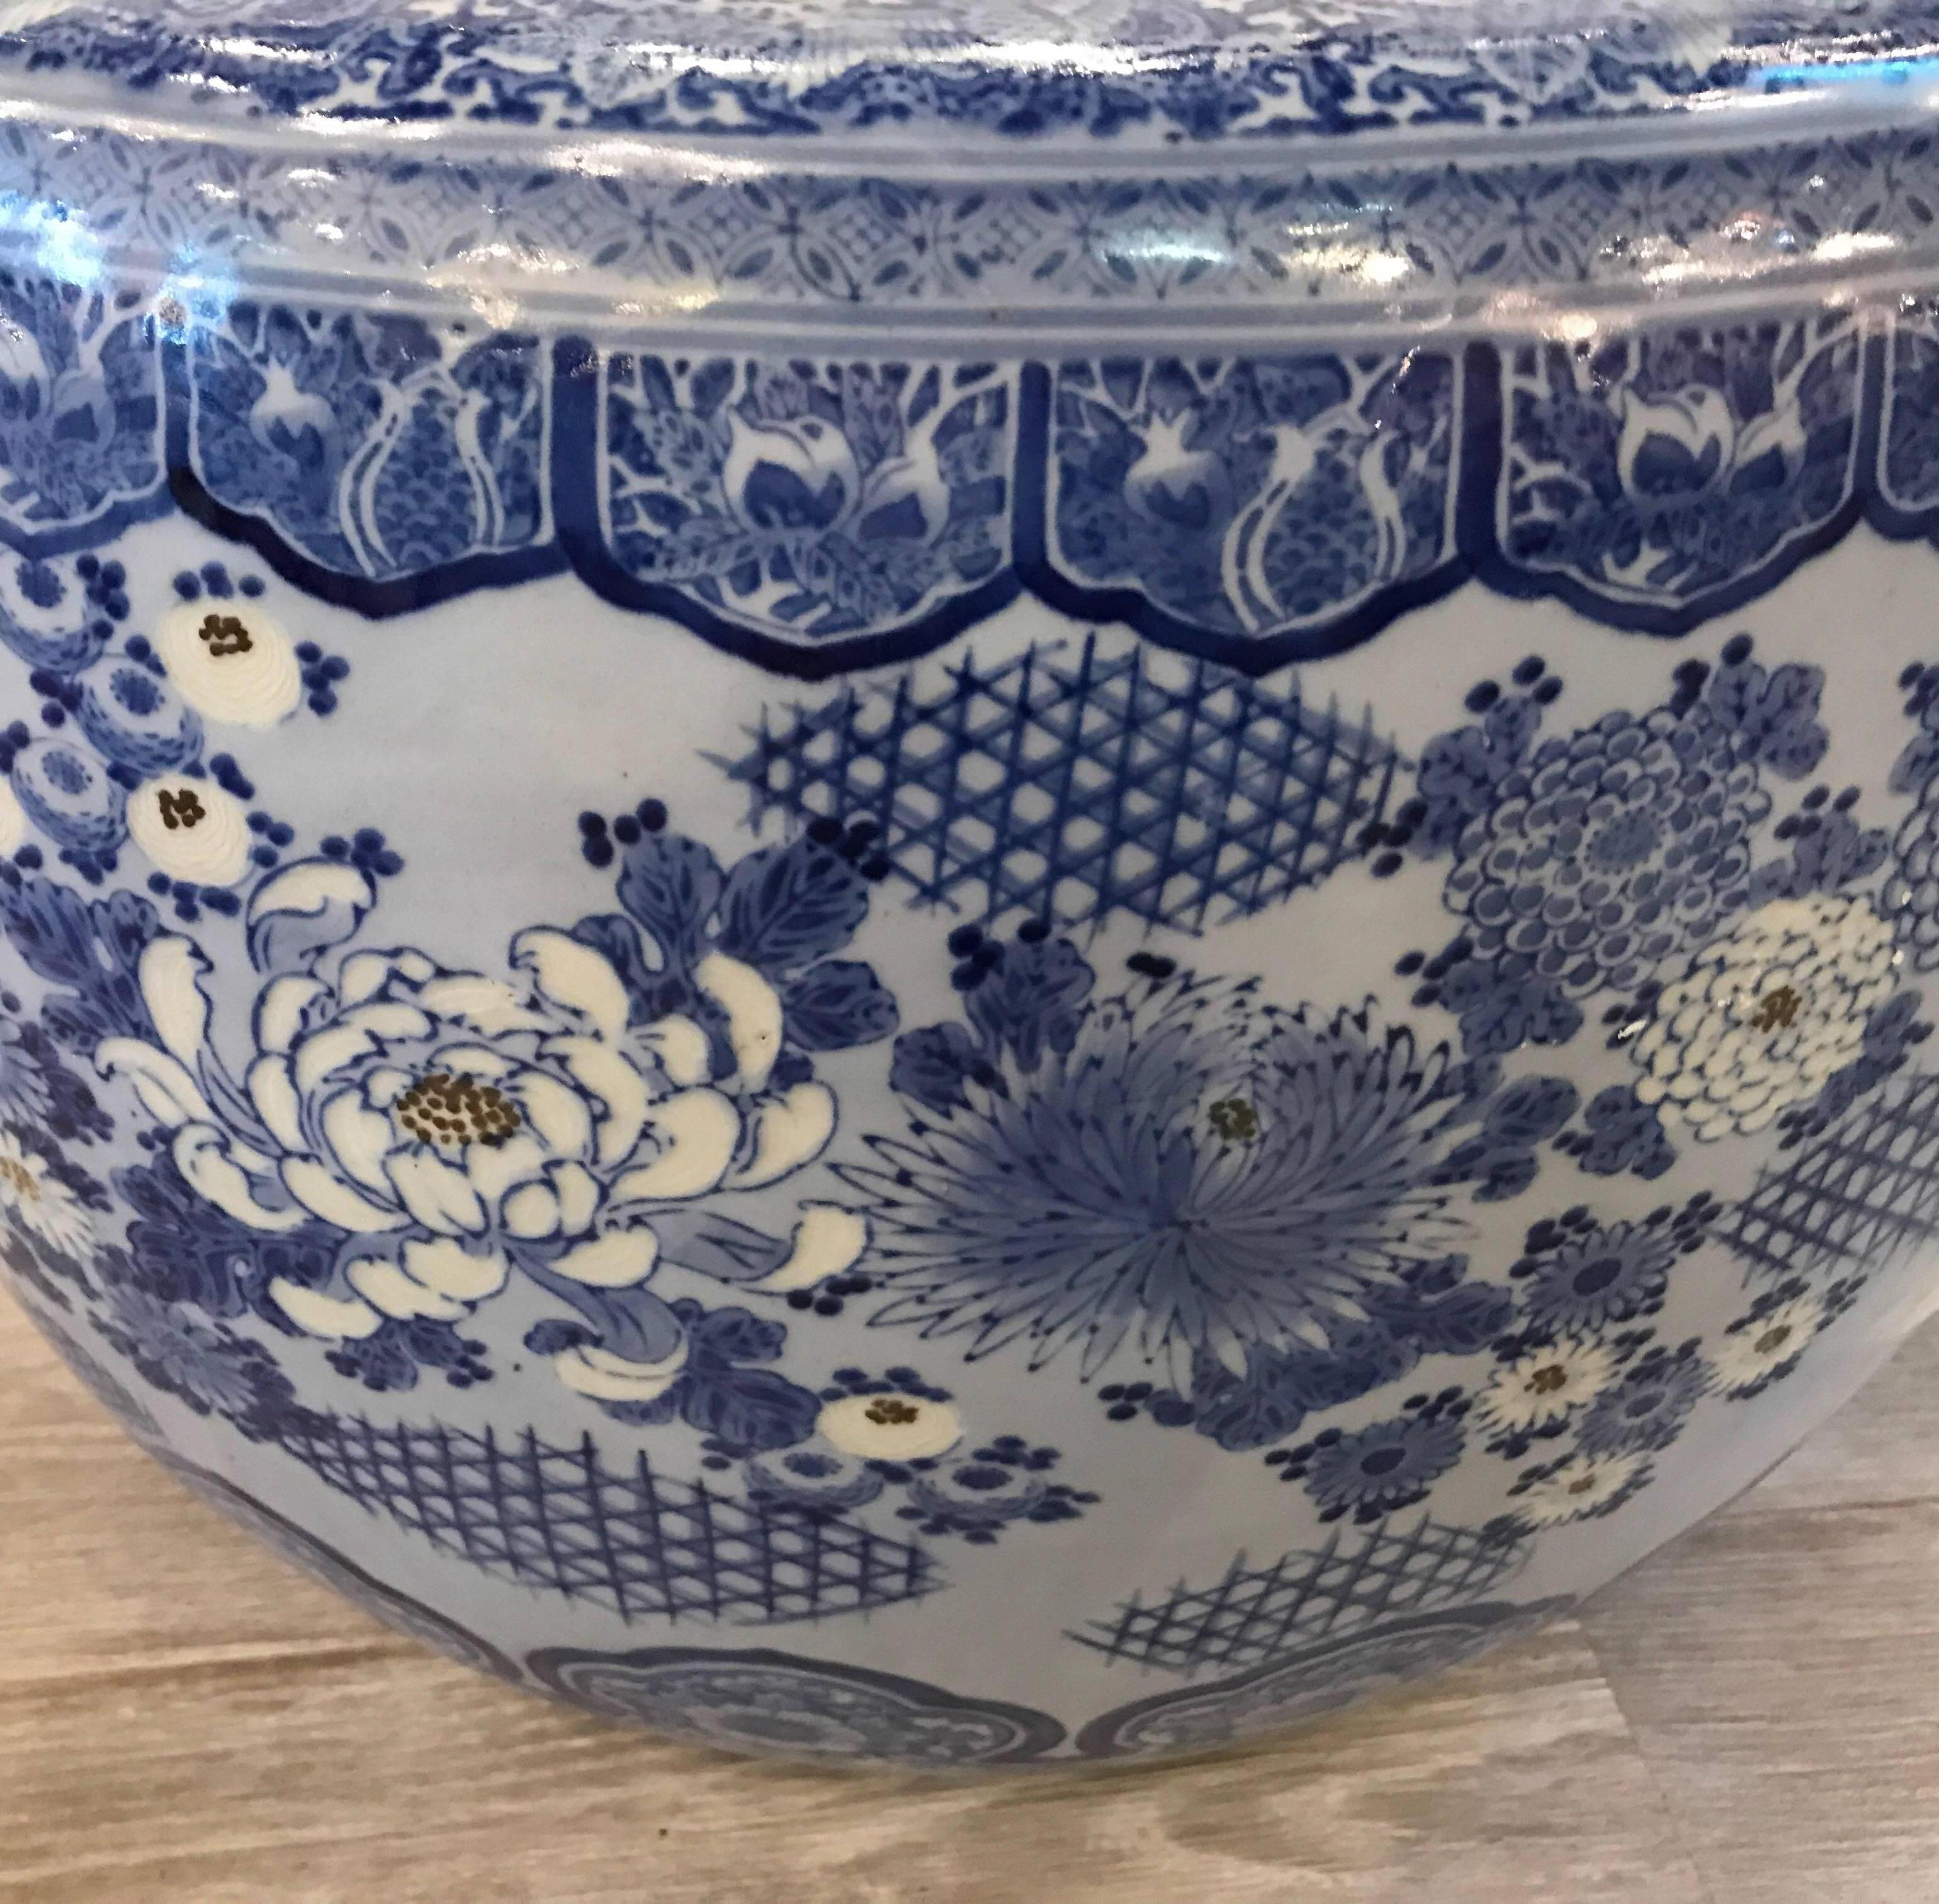 A 20th century blue and white porcelain planter a full 20 inches in diameter. From the Arita region.